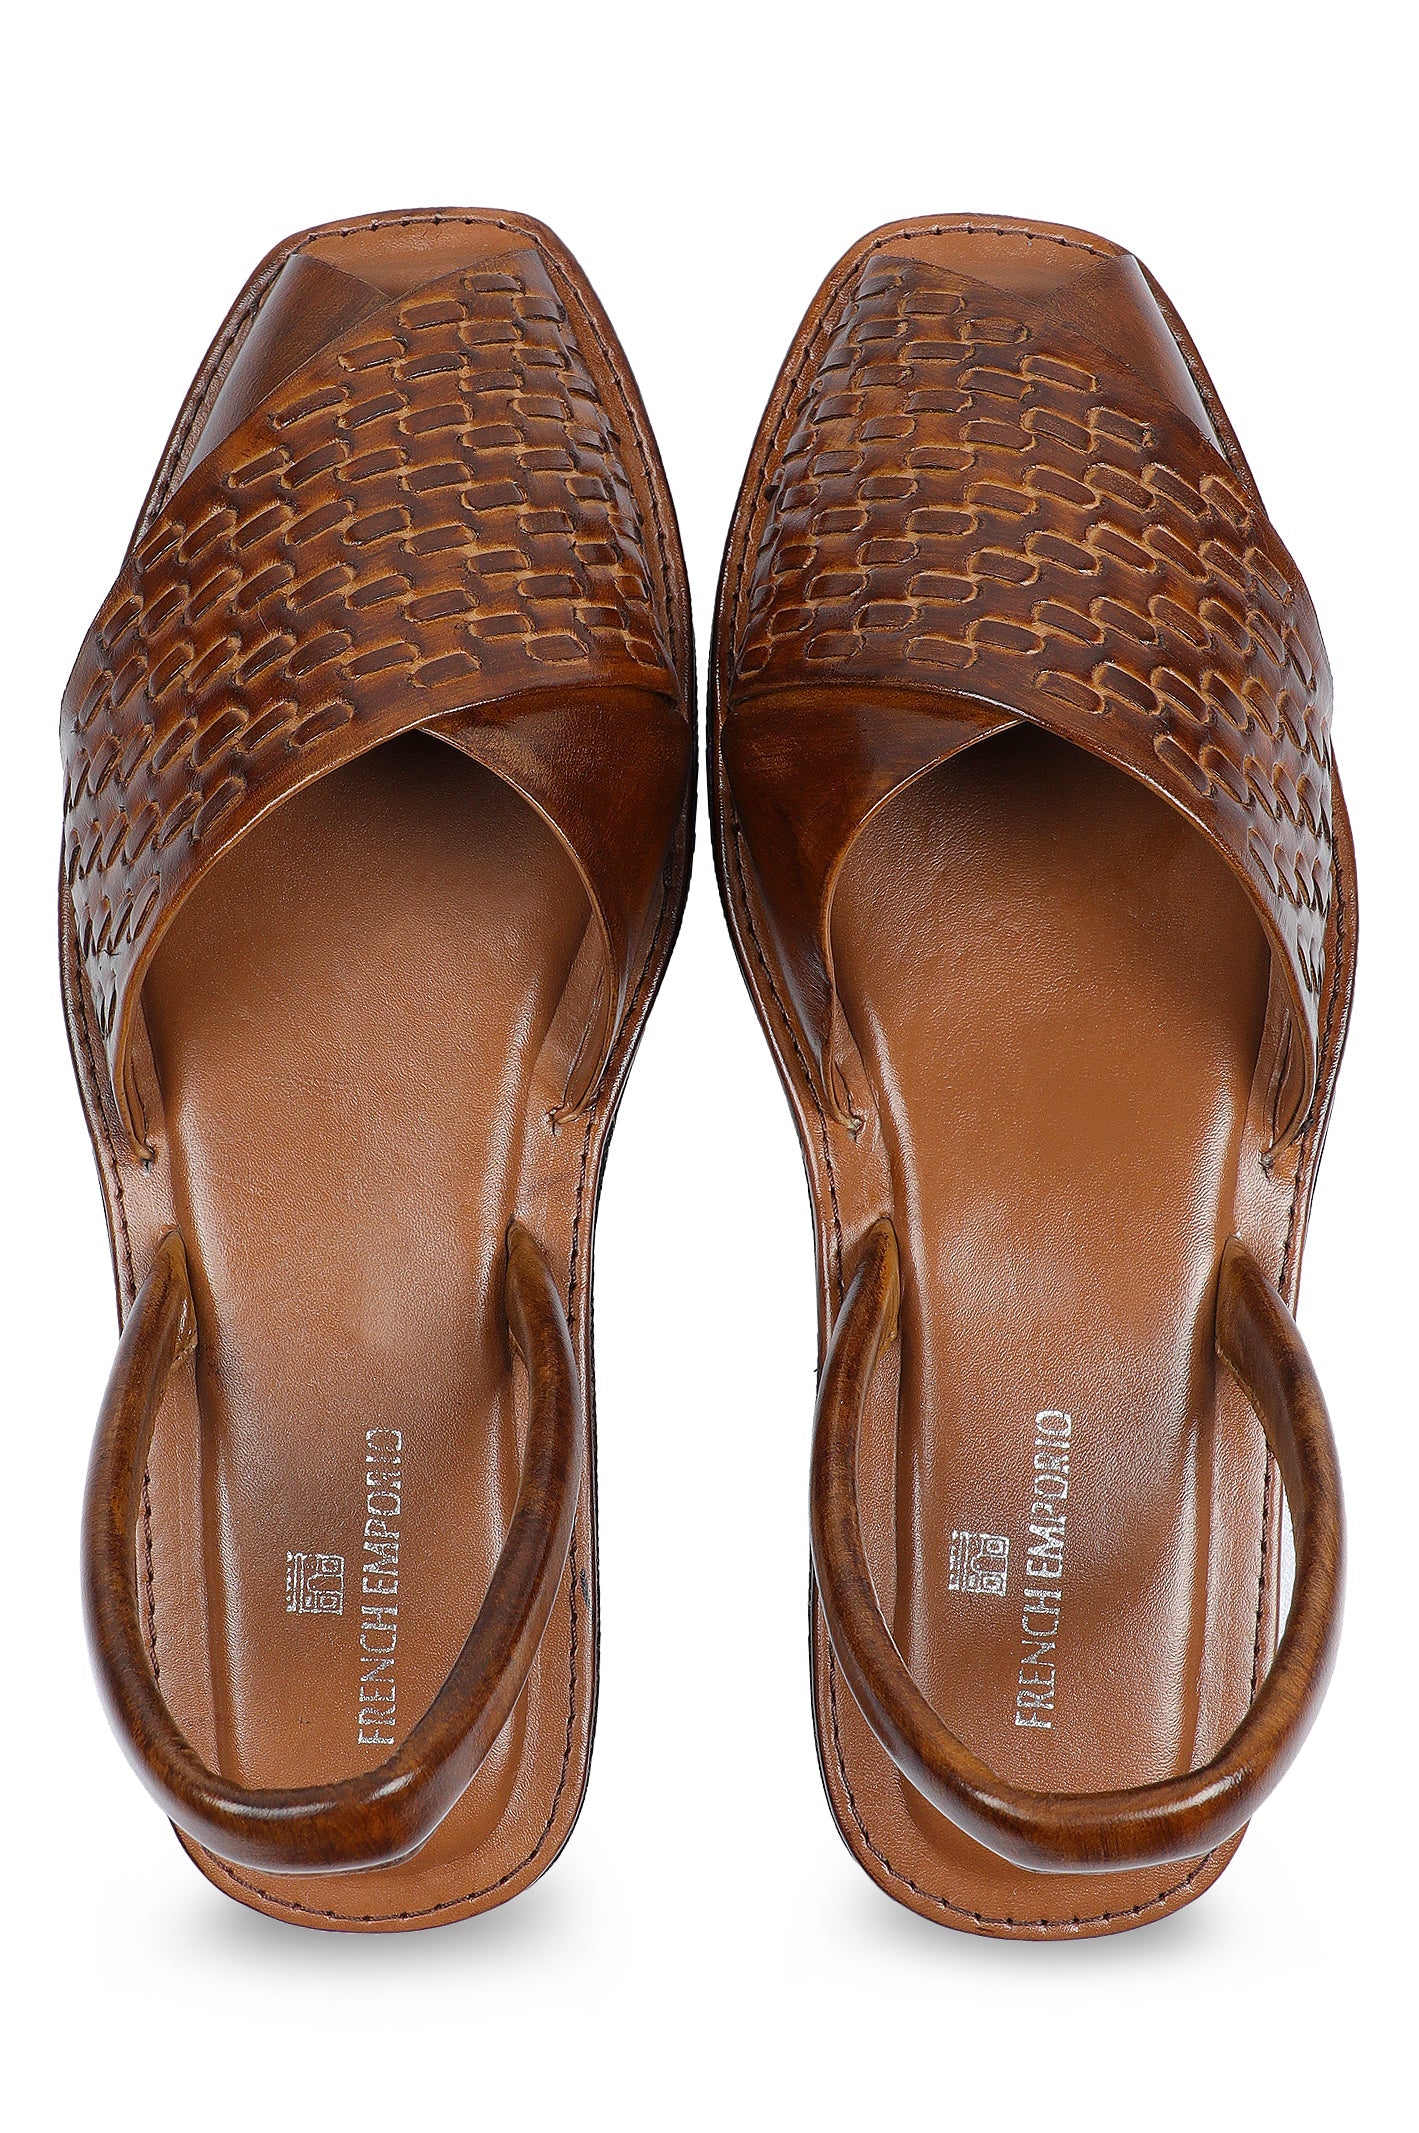 French Emporio Men Sandals SKU: SLD-0035-TAN - Diners